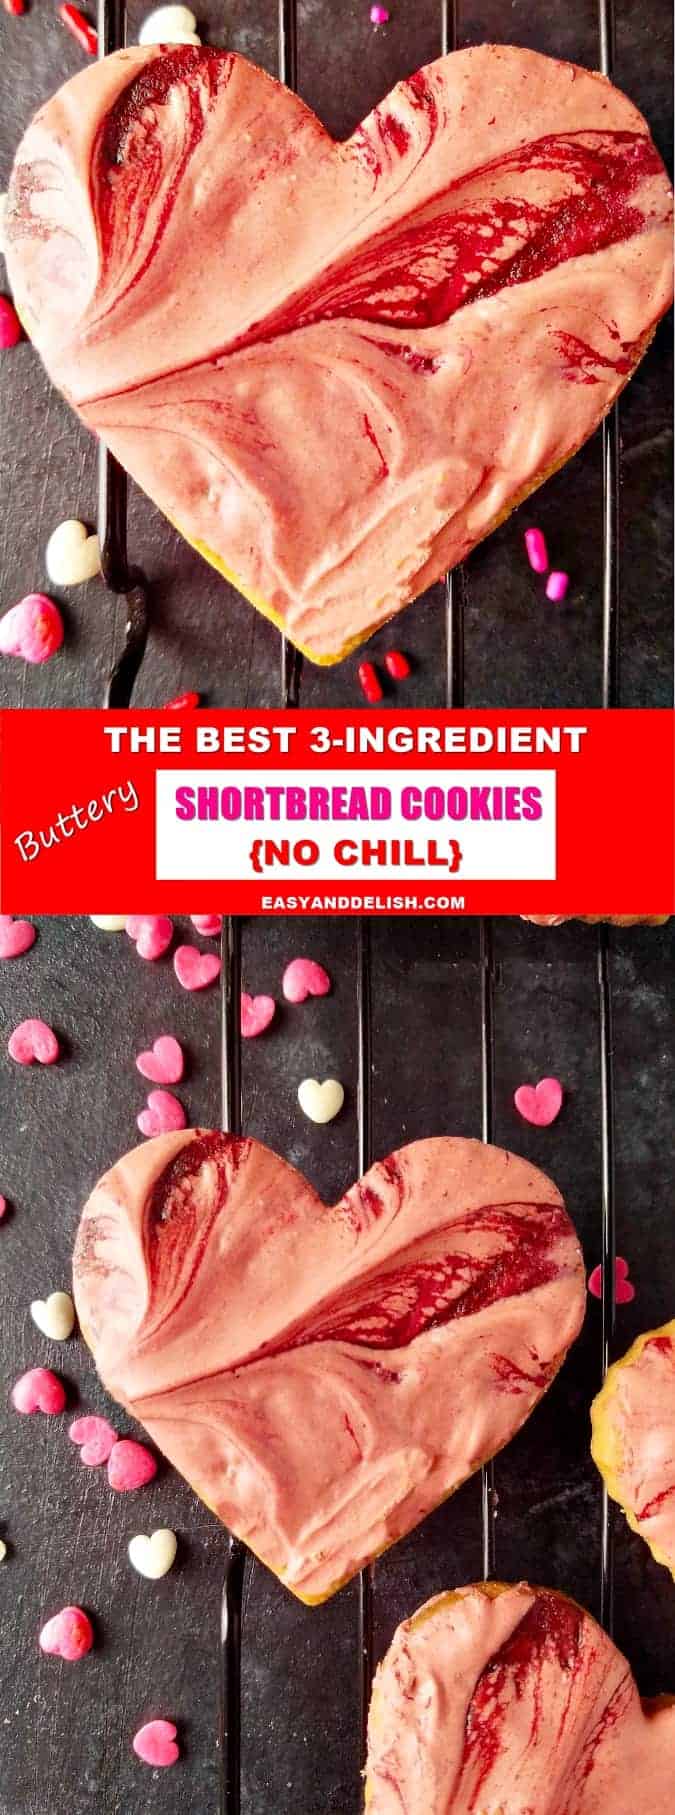 How to Make Shortbread Cookies (Easy, 3-Ingredient) - Easy and Delish